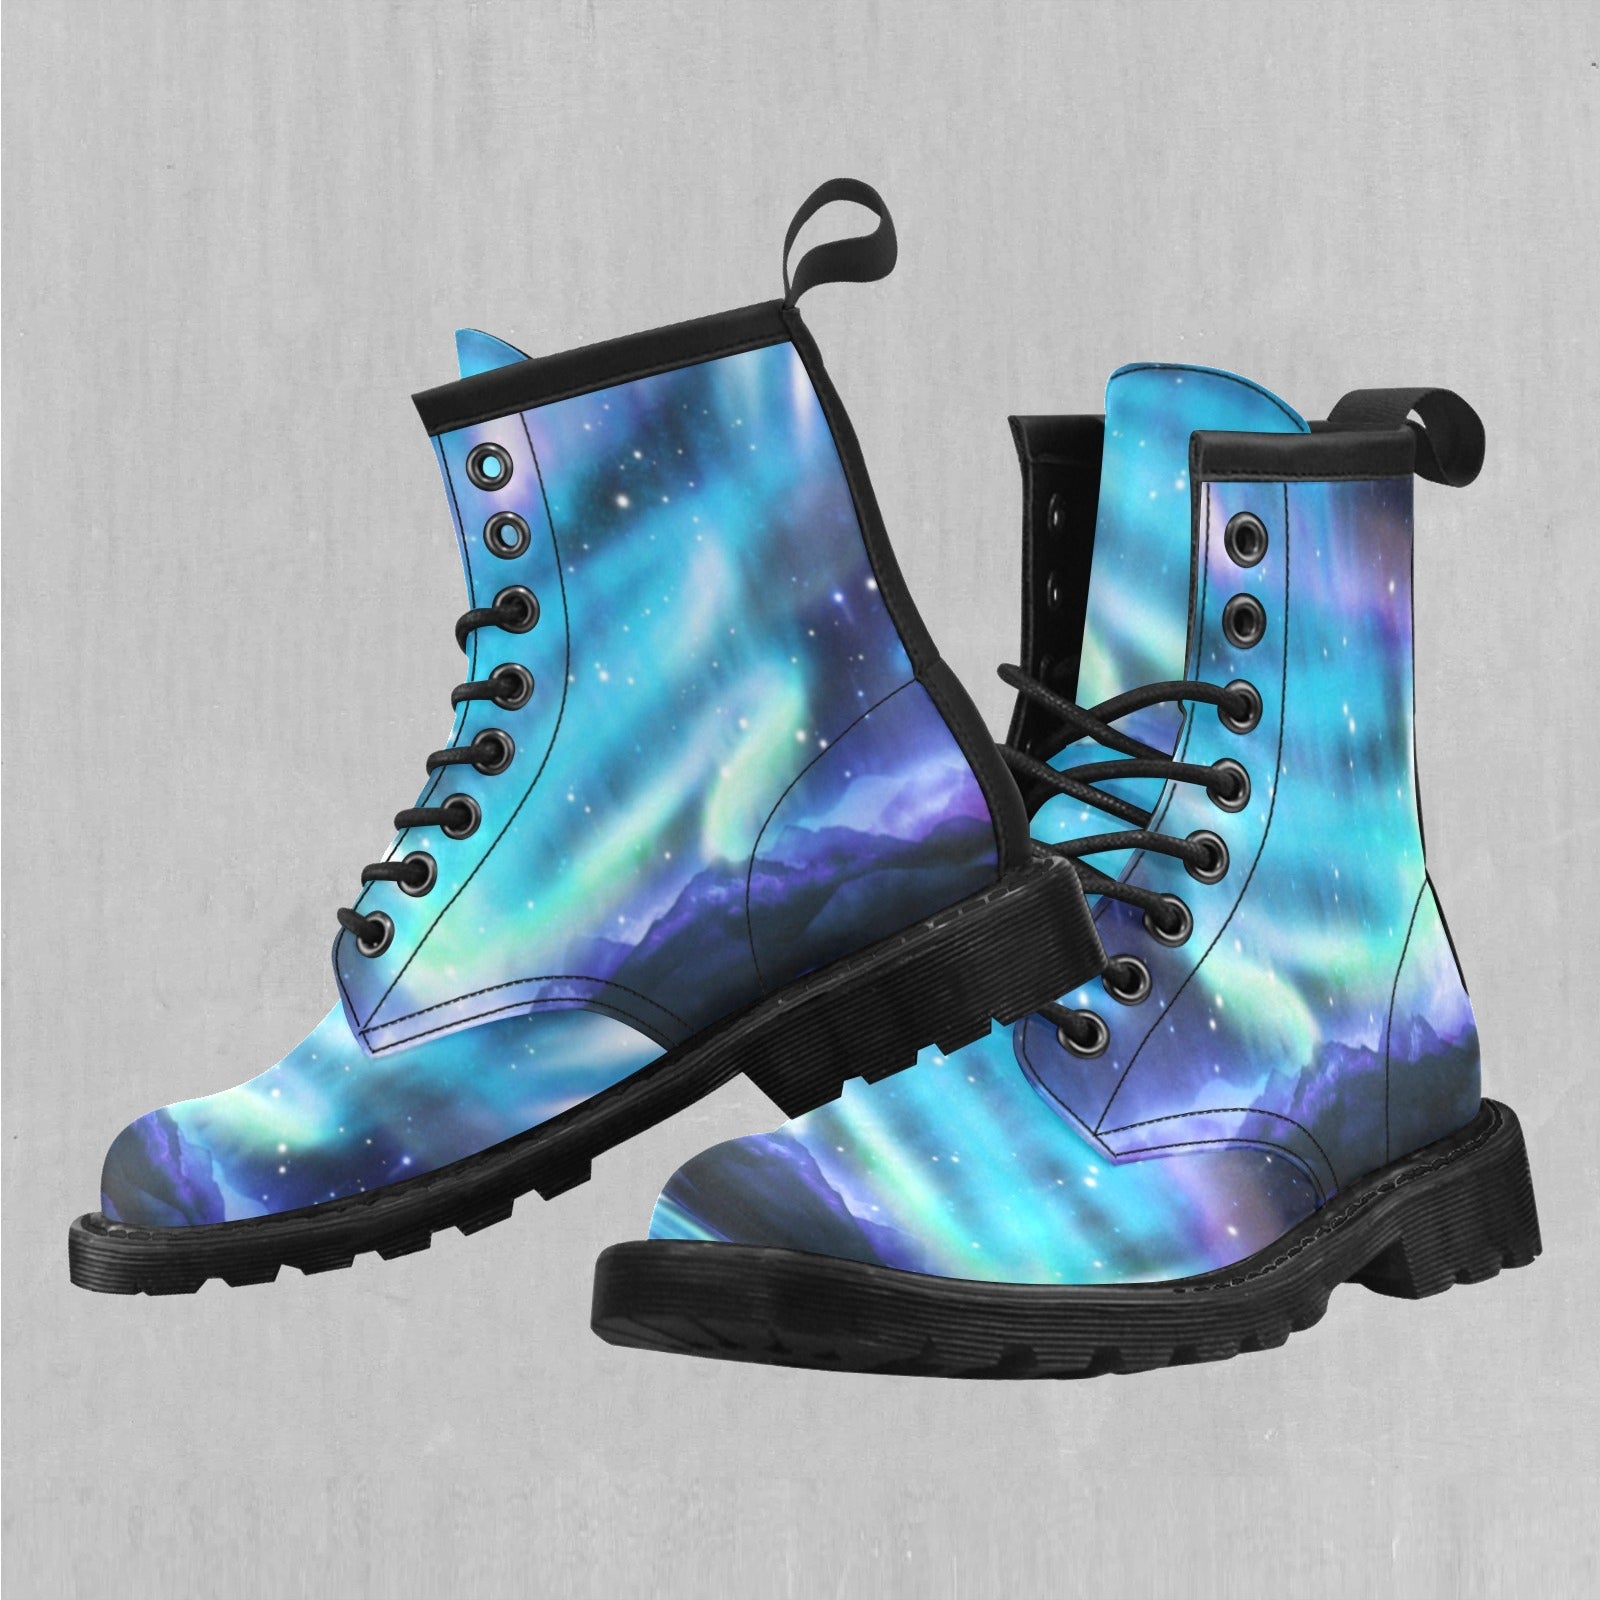 Northern Lights Women's Lace Up Boots